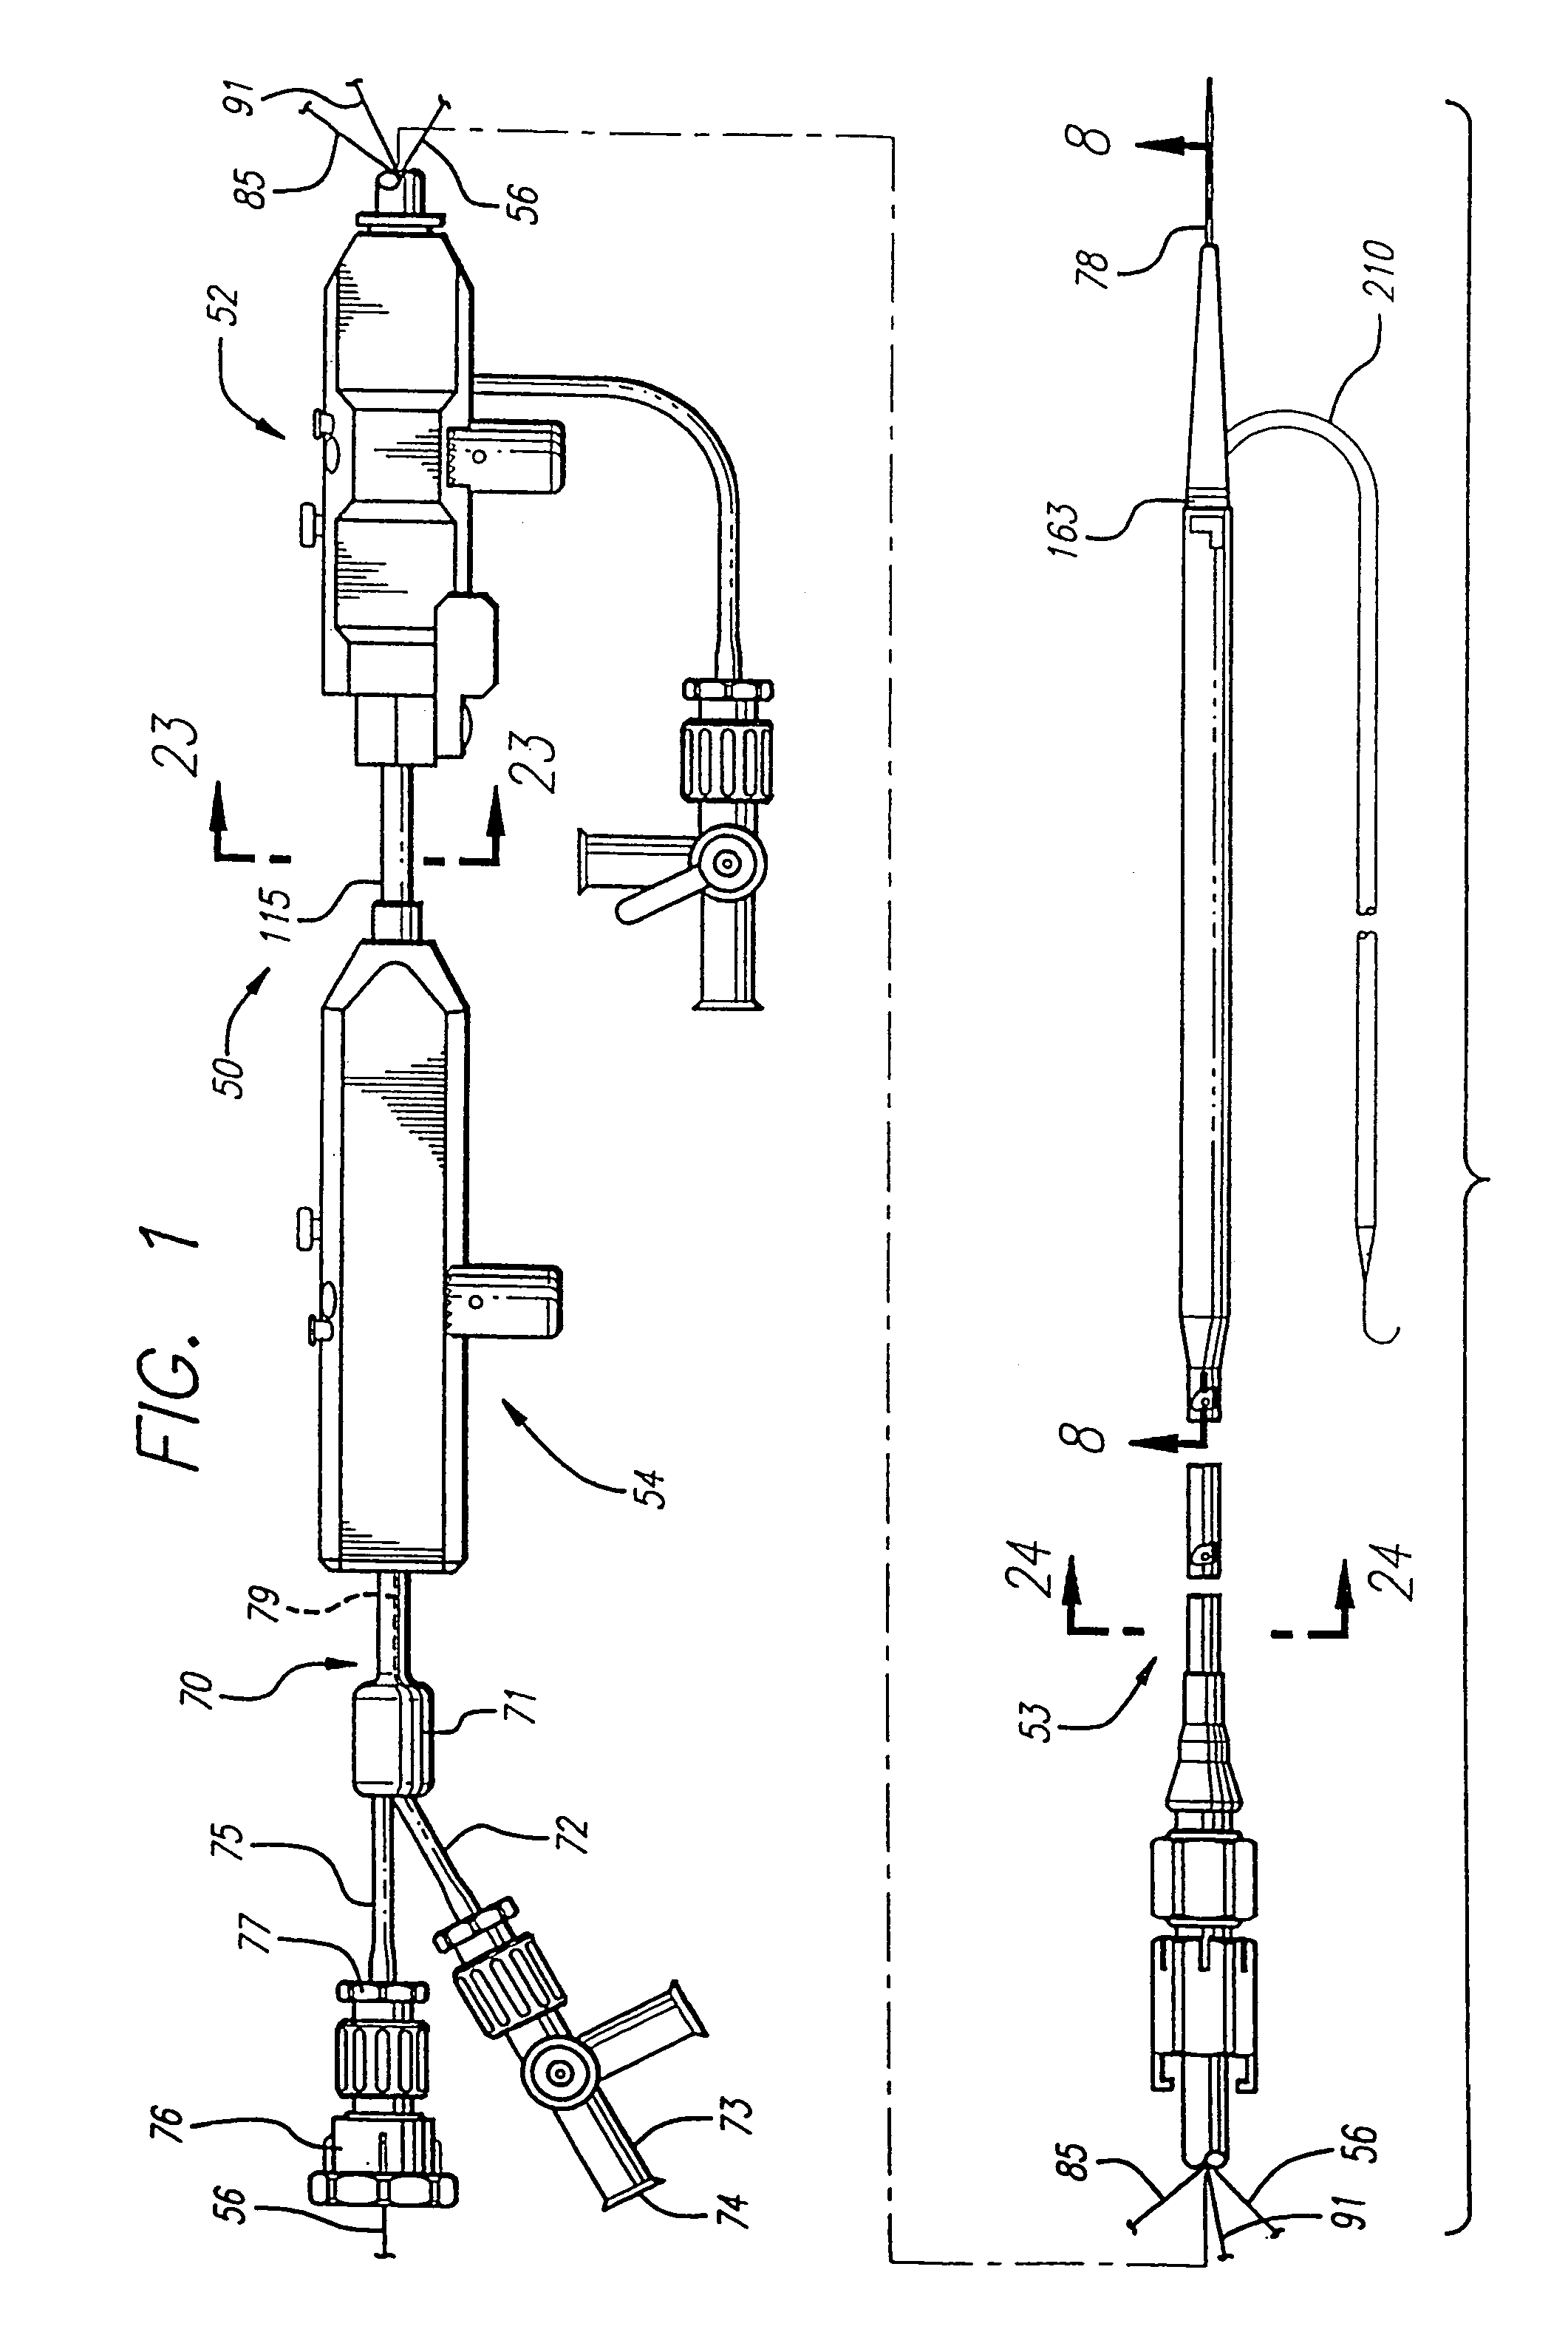 Bifurcated multicapsule intraluminal grafting system and method